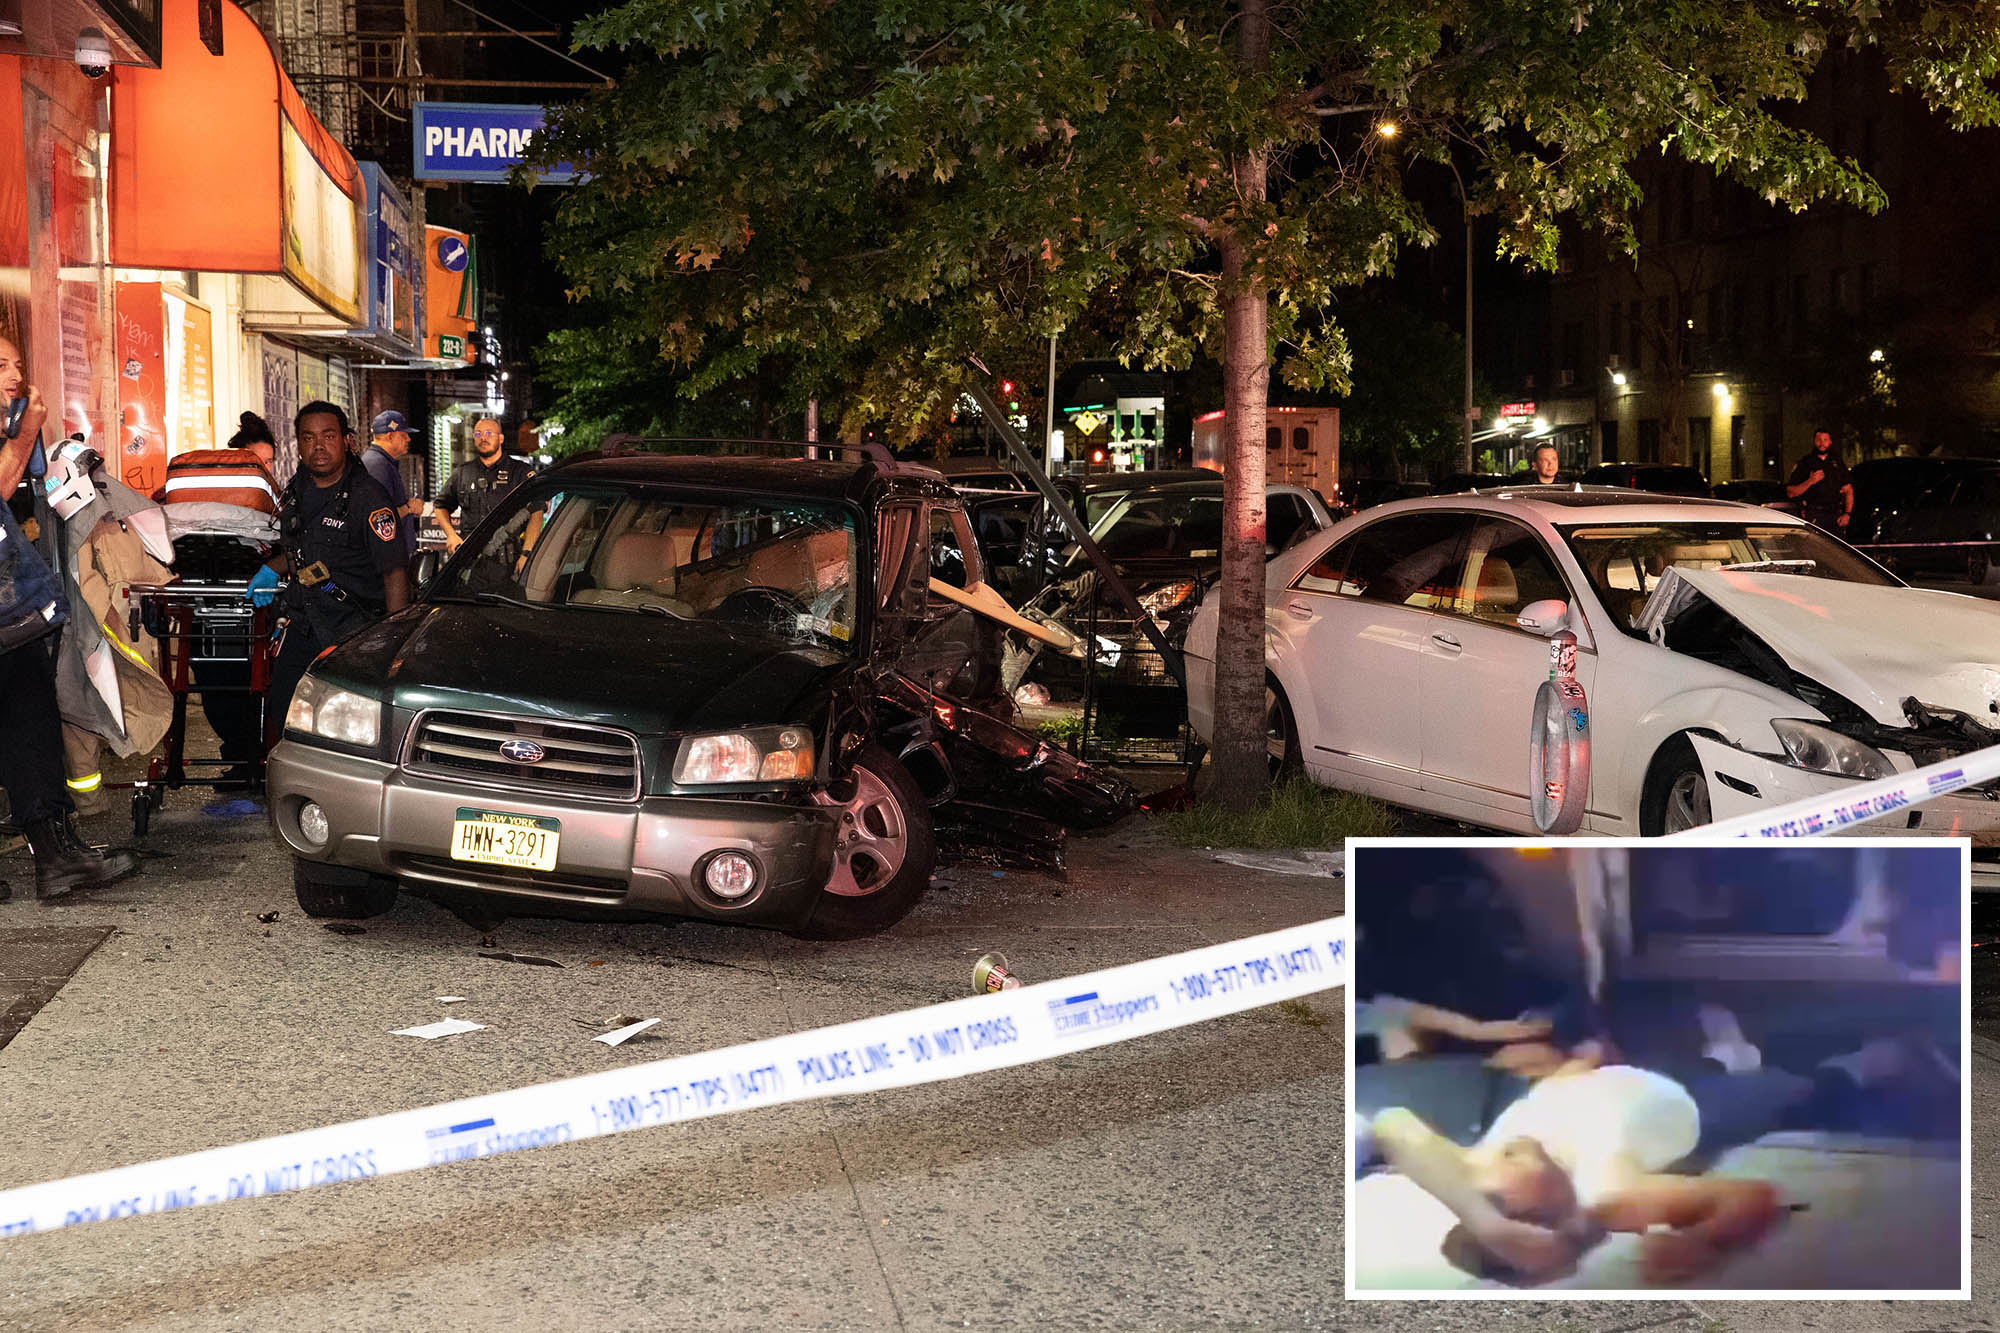 The Mercedes and Subaru collided before the Subaru struck two parked, unoccupied vehicles., cops said. It then careened onto the sidewalk and struck two men, cops said.